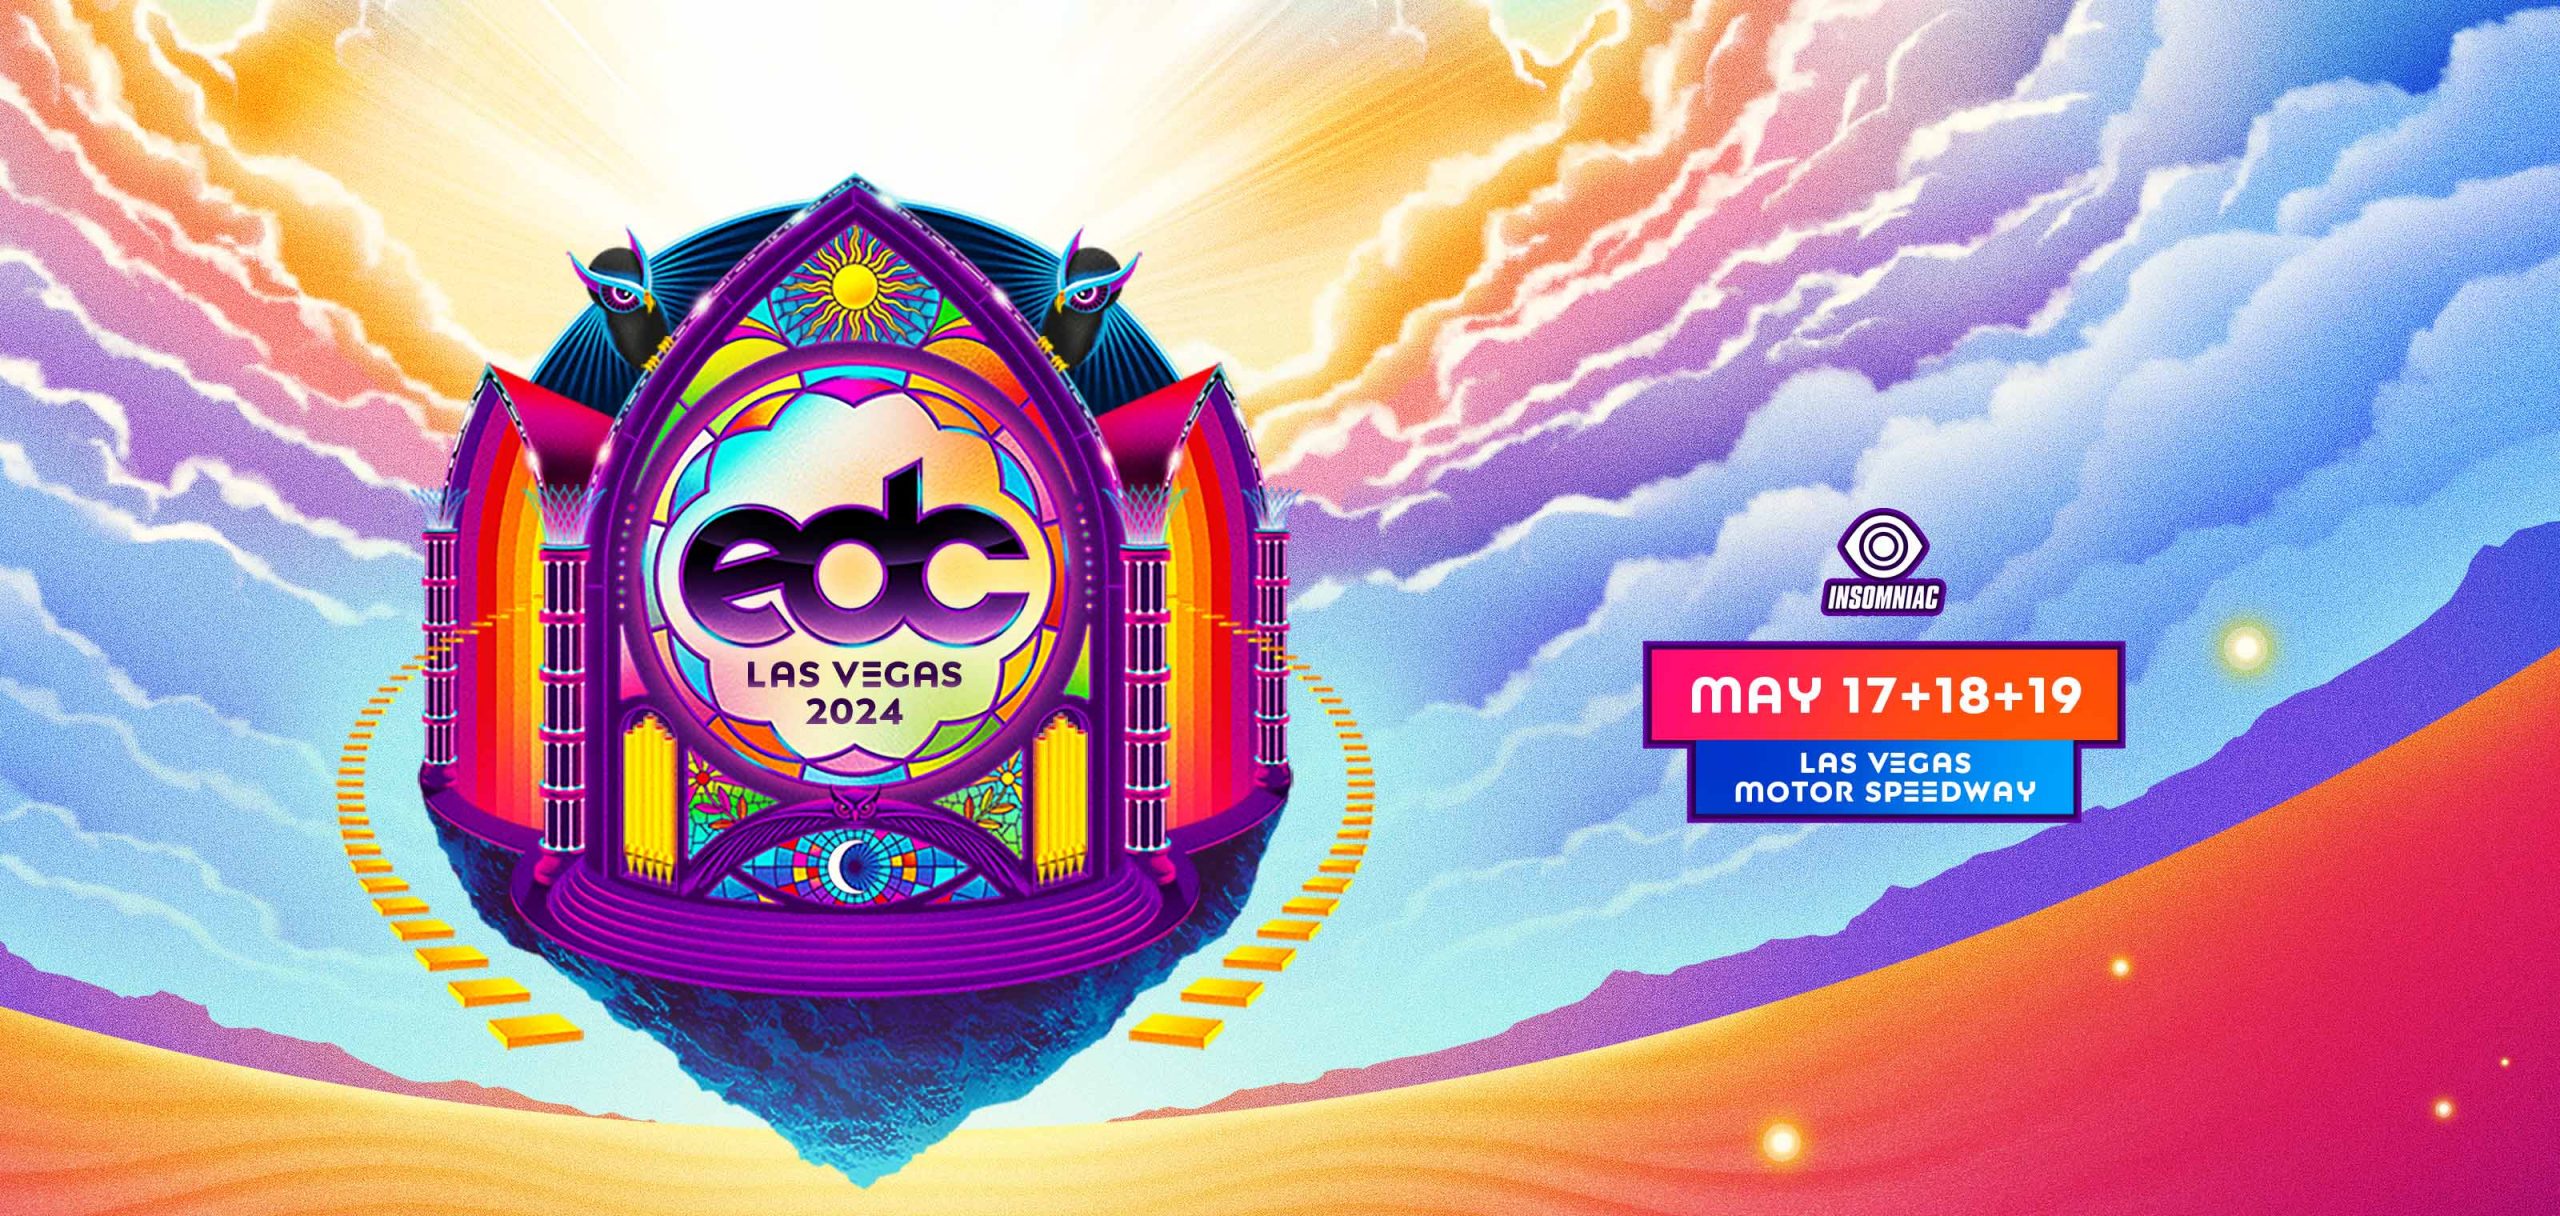 Vibrant backdrop representing the EDCLV festival with dates and location